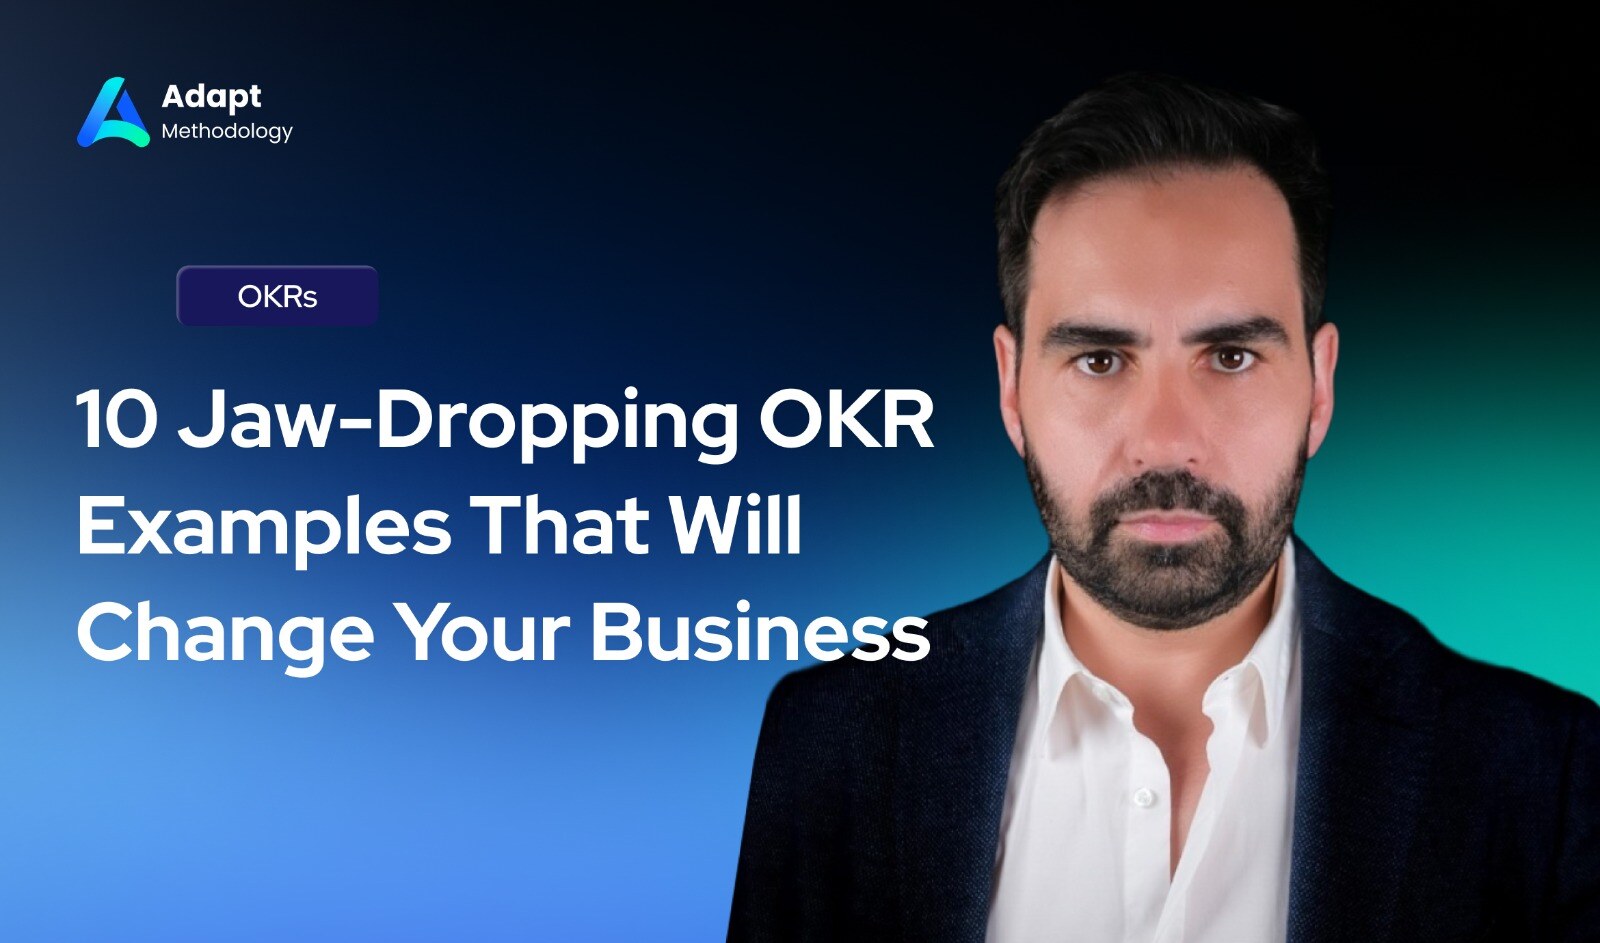 10 Jaw-Dropping OKR Examples That Will Change Your Business